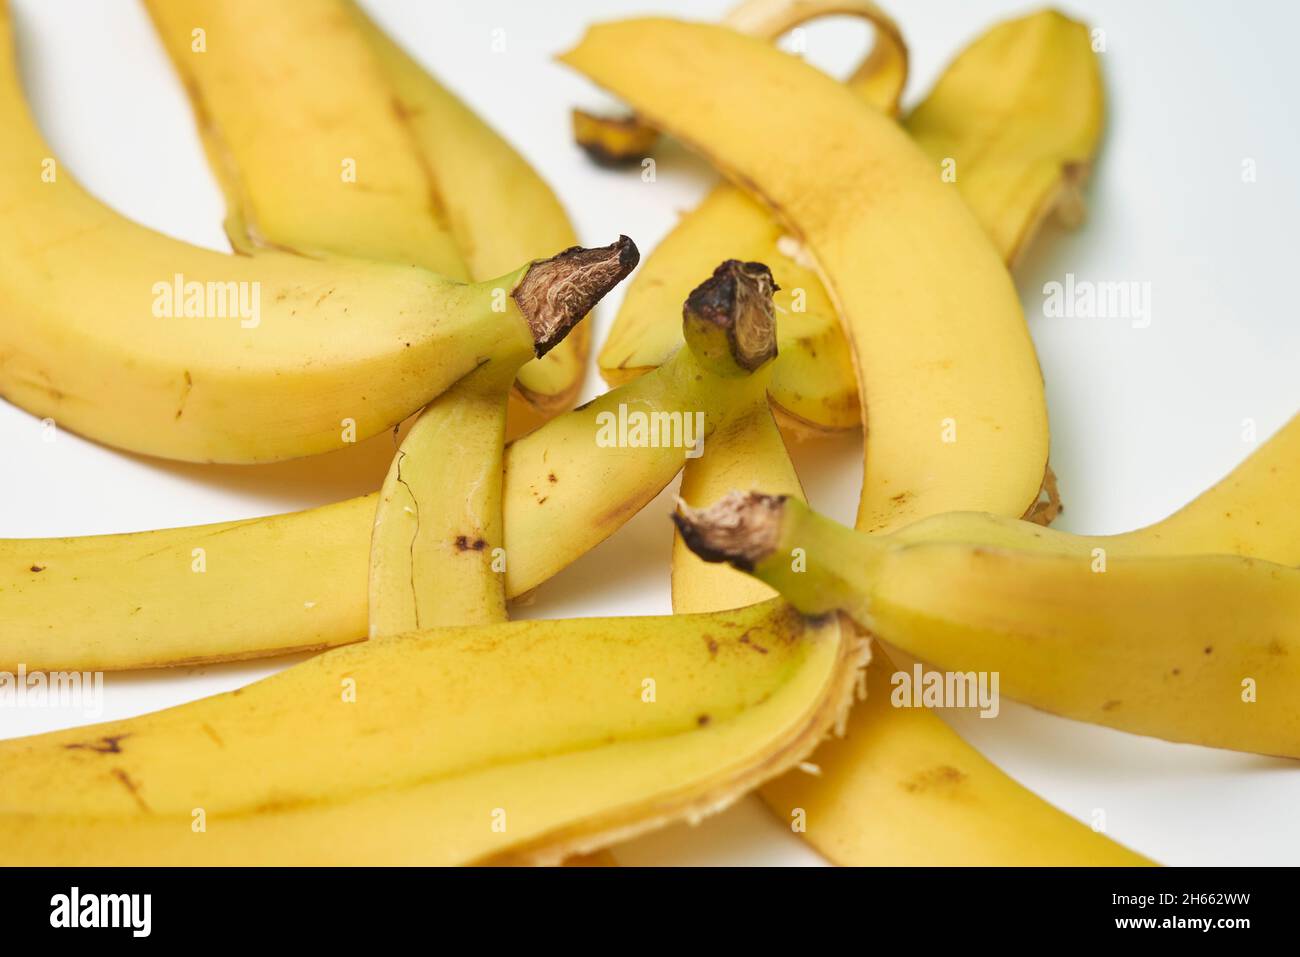 DIY Banana Peels For Skin 3 UberCool Ways To Use This Fruit Husk In Your  Daily Beauty Regime